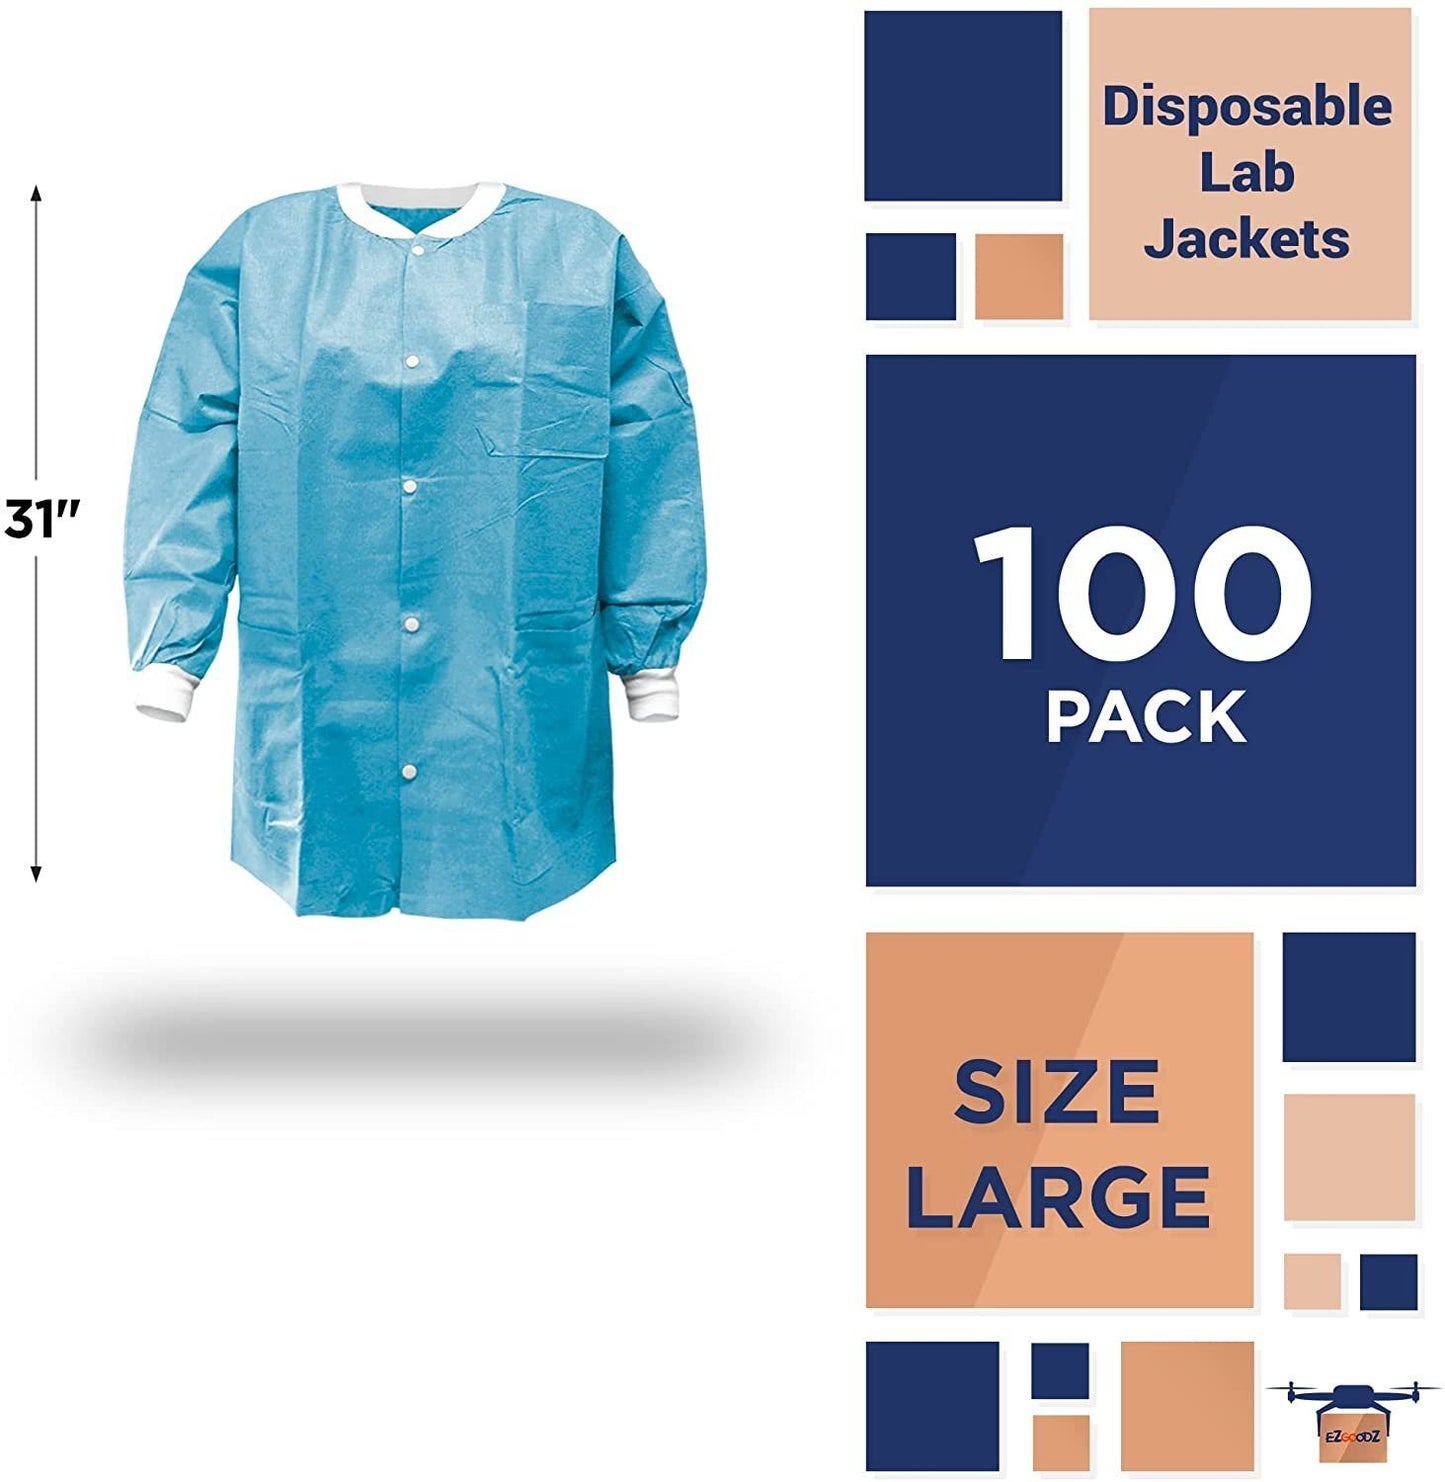 Disposable Lab Jackets; 33" Long. Pack of 100 Blue Hip-Length Work Gowns XX-Large. SMS 50 gsm Shirts with Snaps Front; Knit Cuffs & Collar; 3 Pockets. PPE Body Protective Short Coats in Bulk.